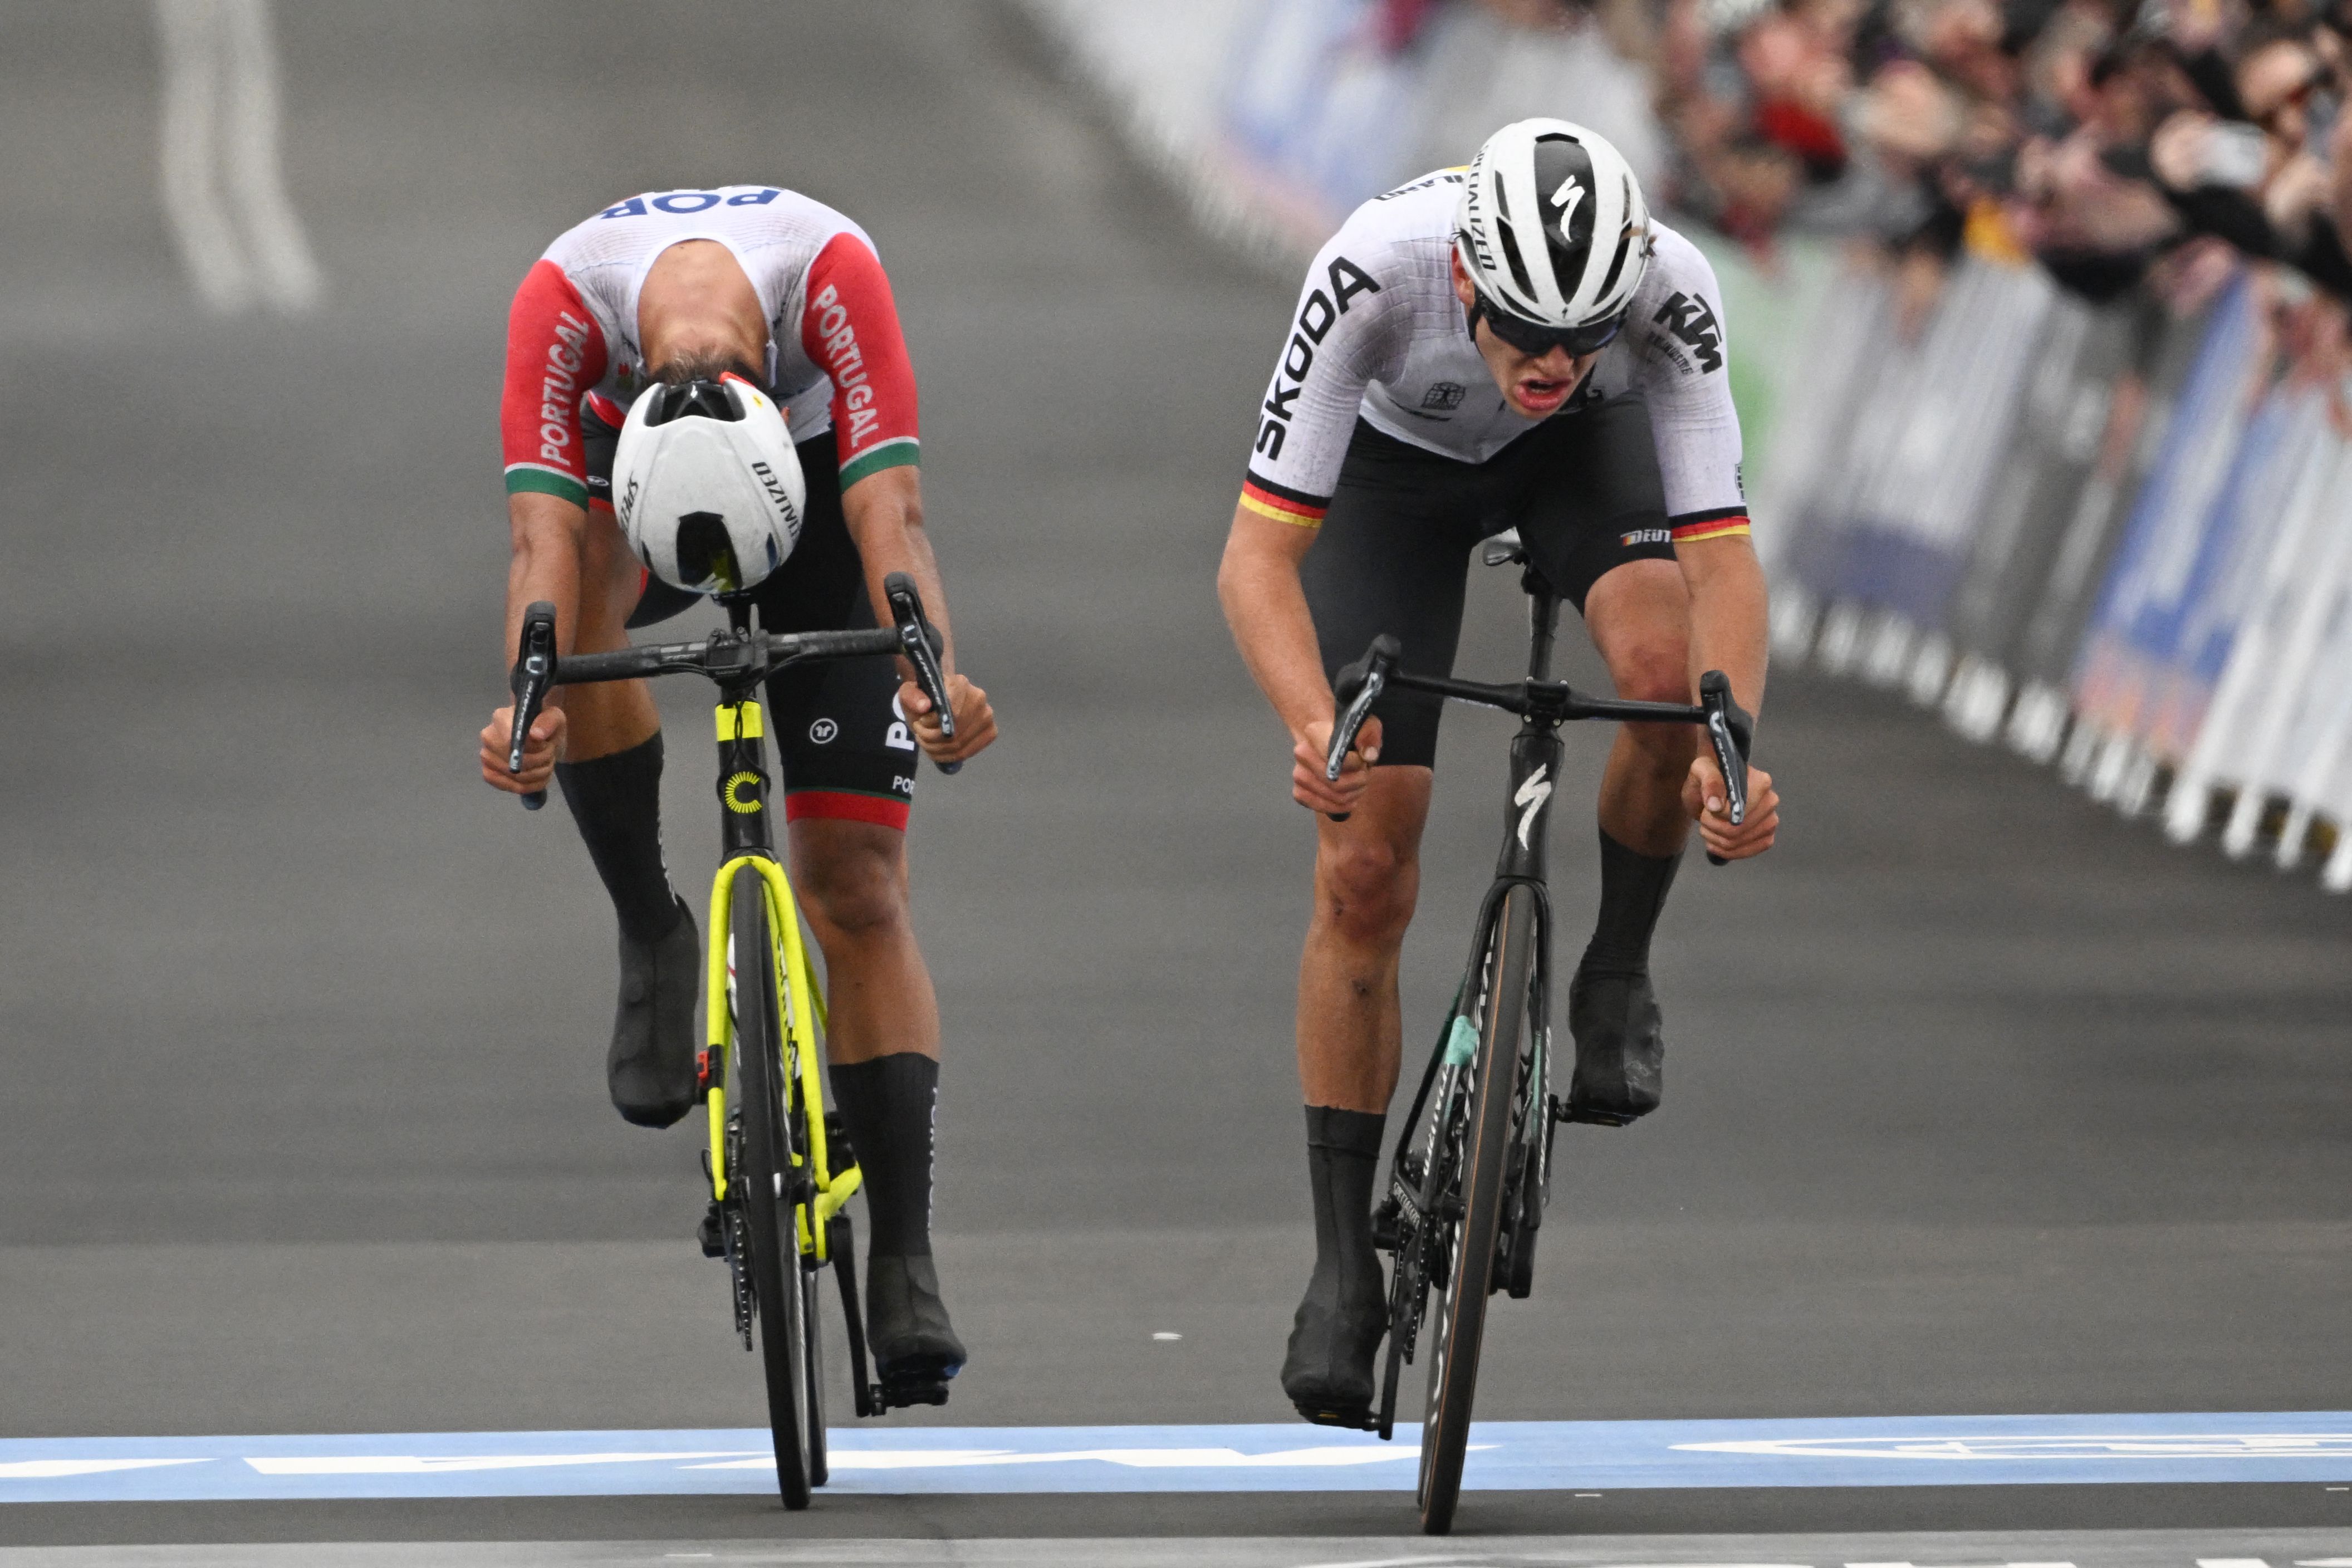 Two cyclists, side by side, sprint towards the finish line in a race to determine who will win and who will finish in second place